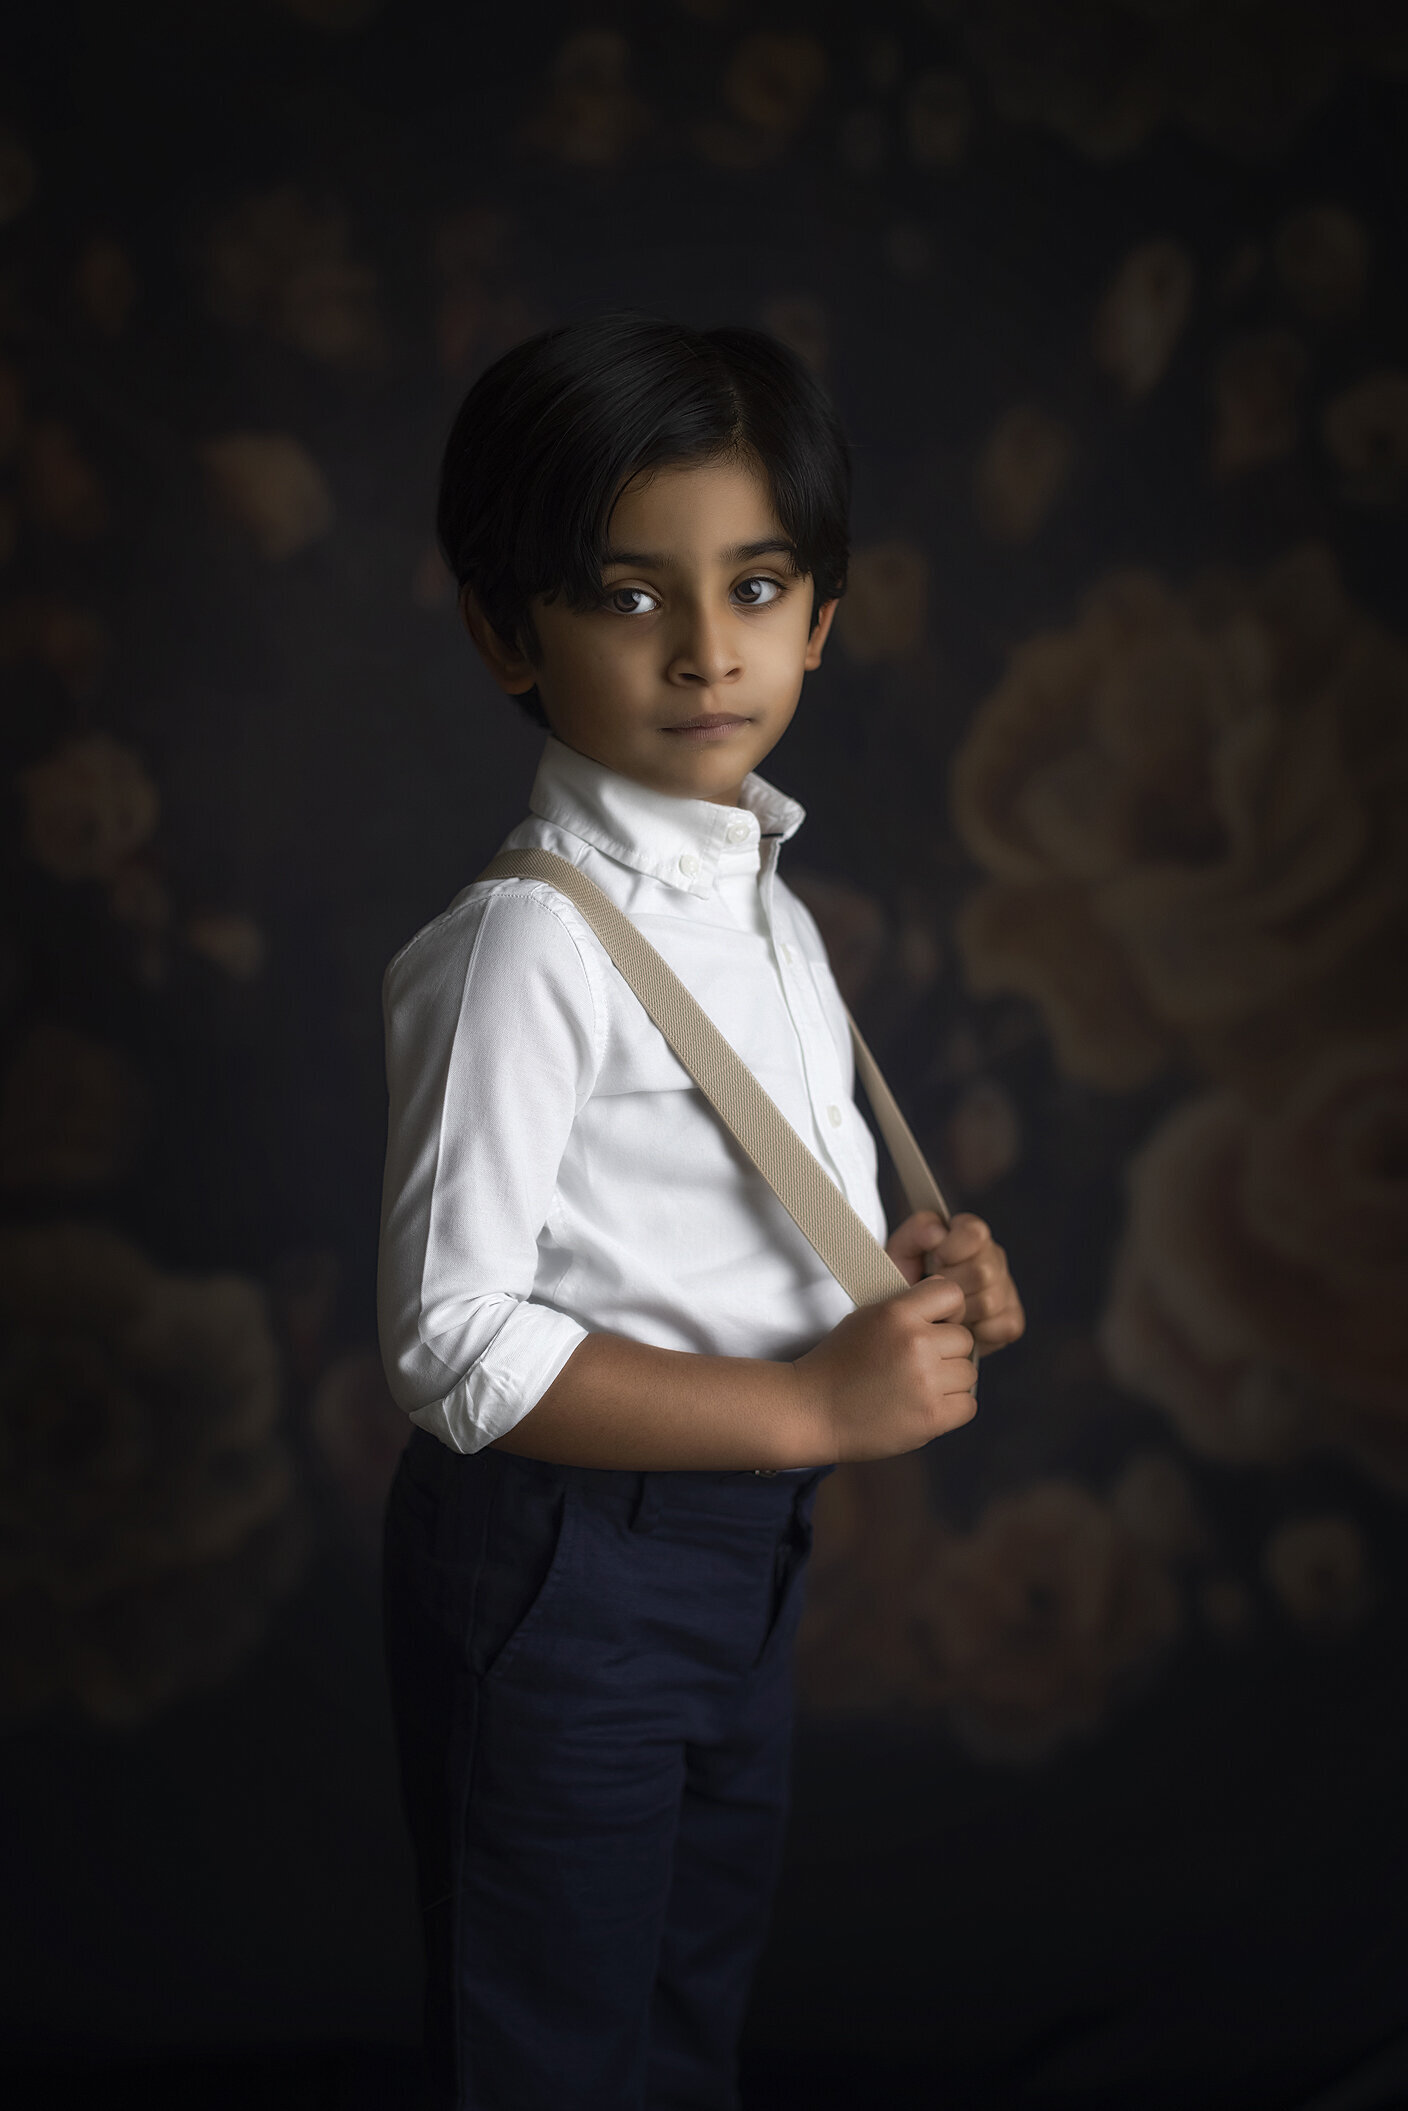 Young boy in Dallas Fine Art photoshoot.